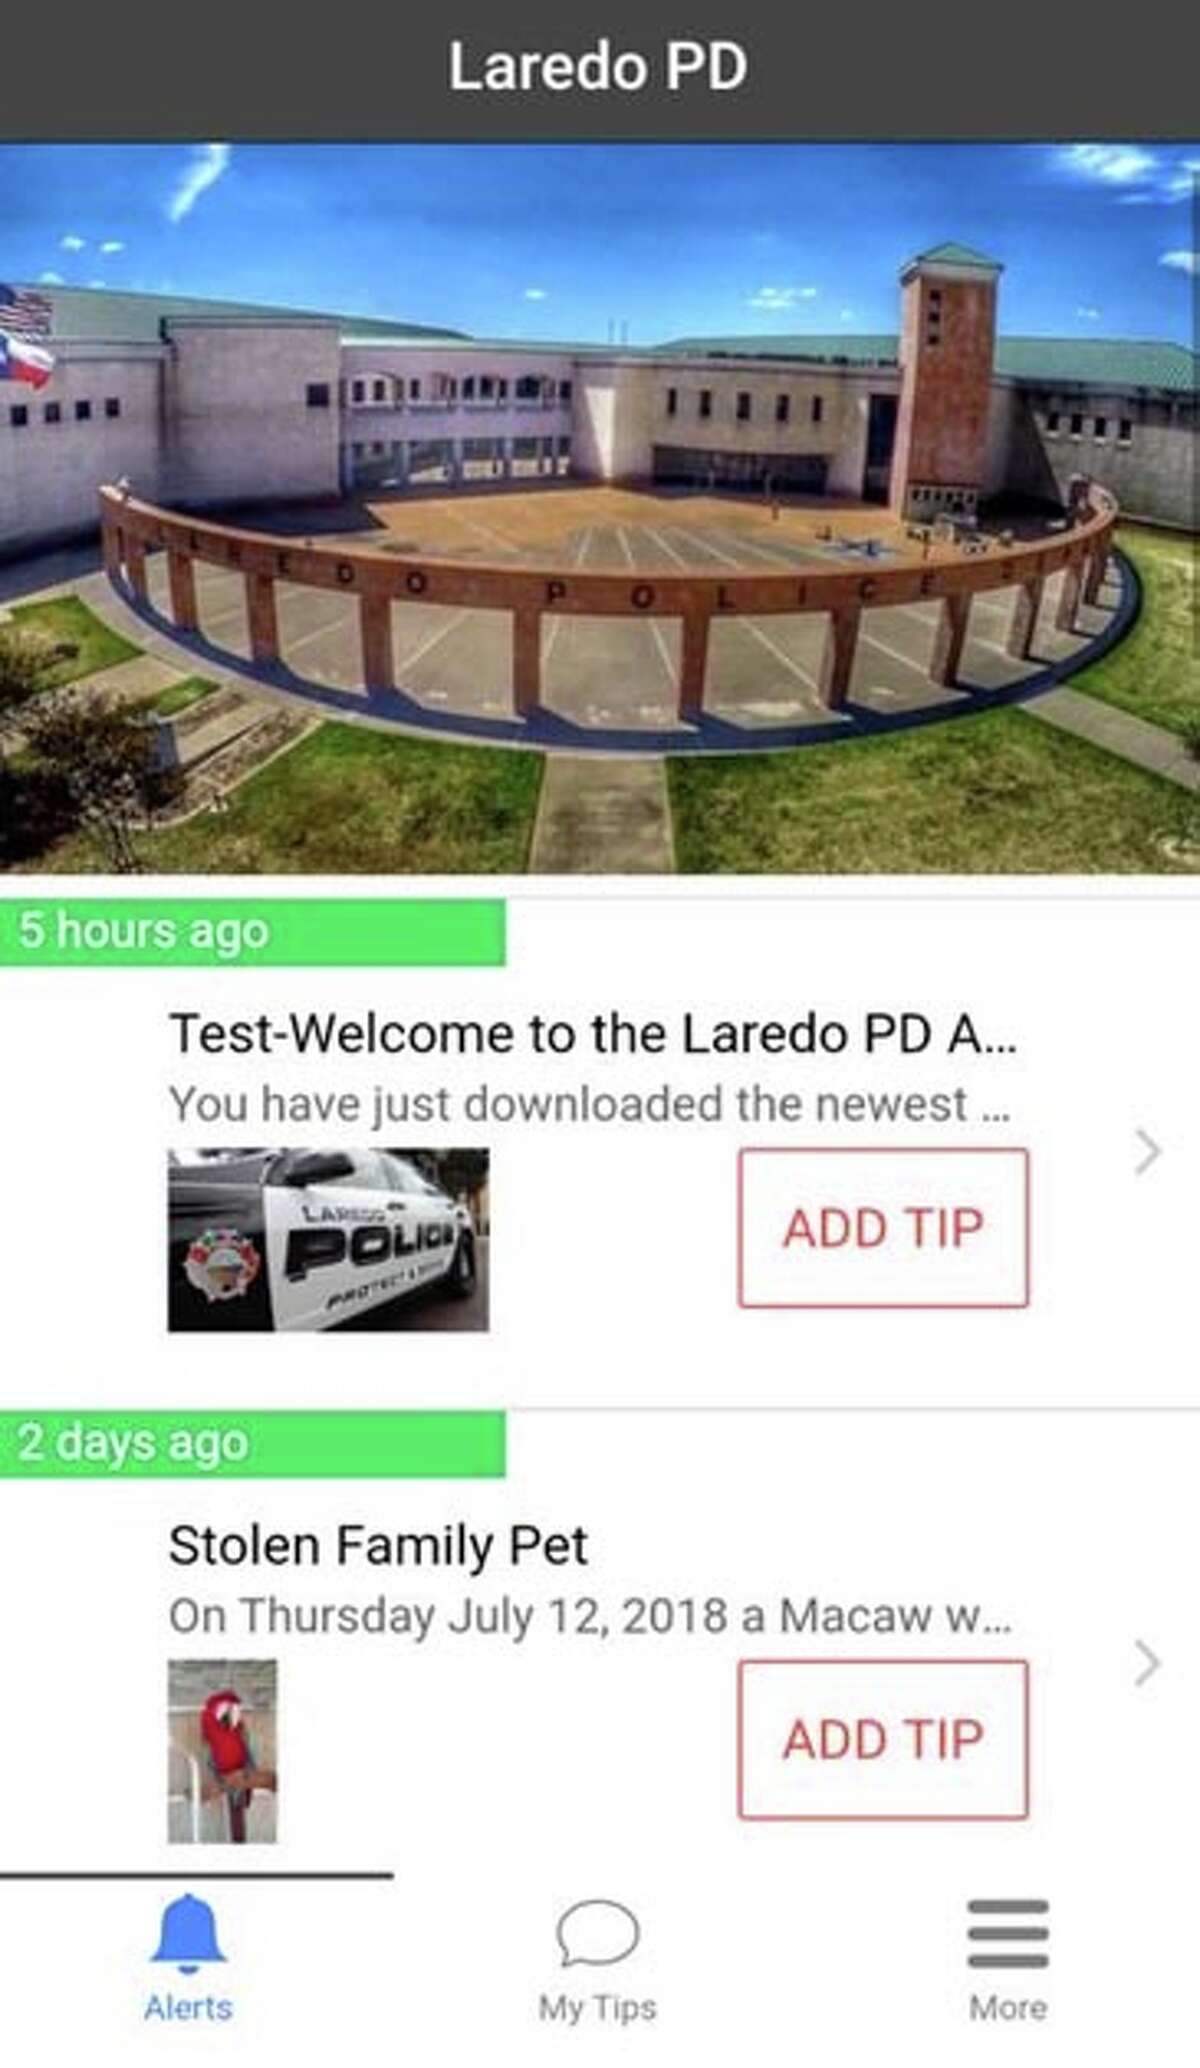 Laredo police launched their new app Thursday. With it, people will receive alert notifications of incidents occurring within the city. People can also submit information cases police need information on.